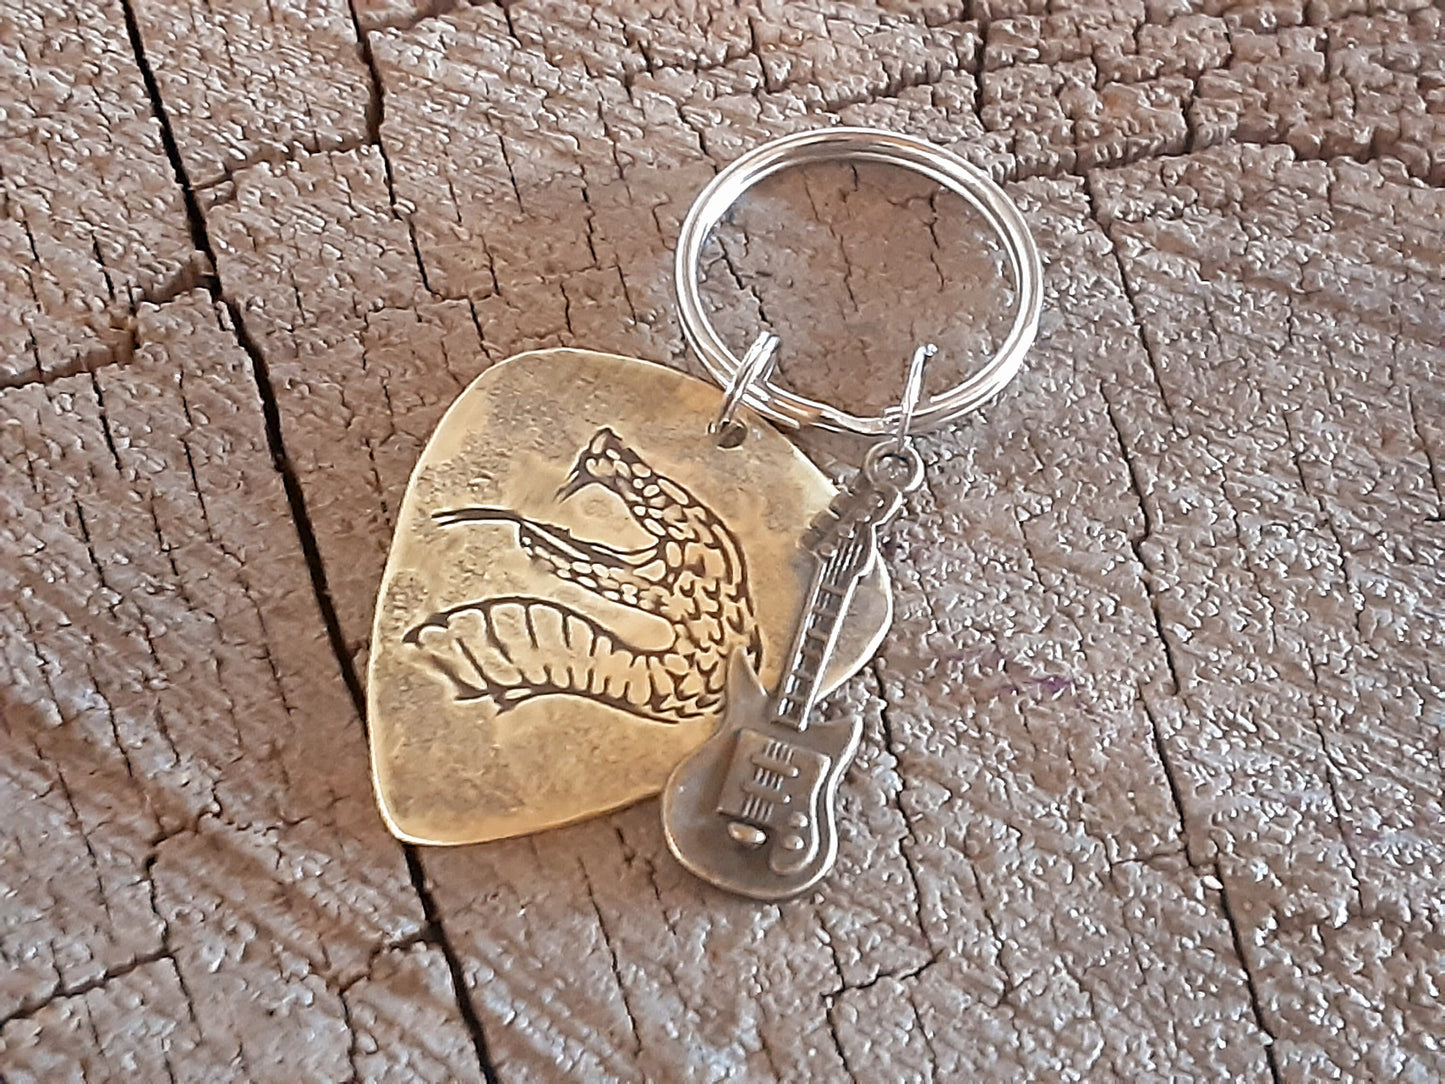 Snake design on brass guitar pick key chain and a small accent guitar charm